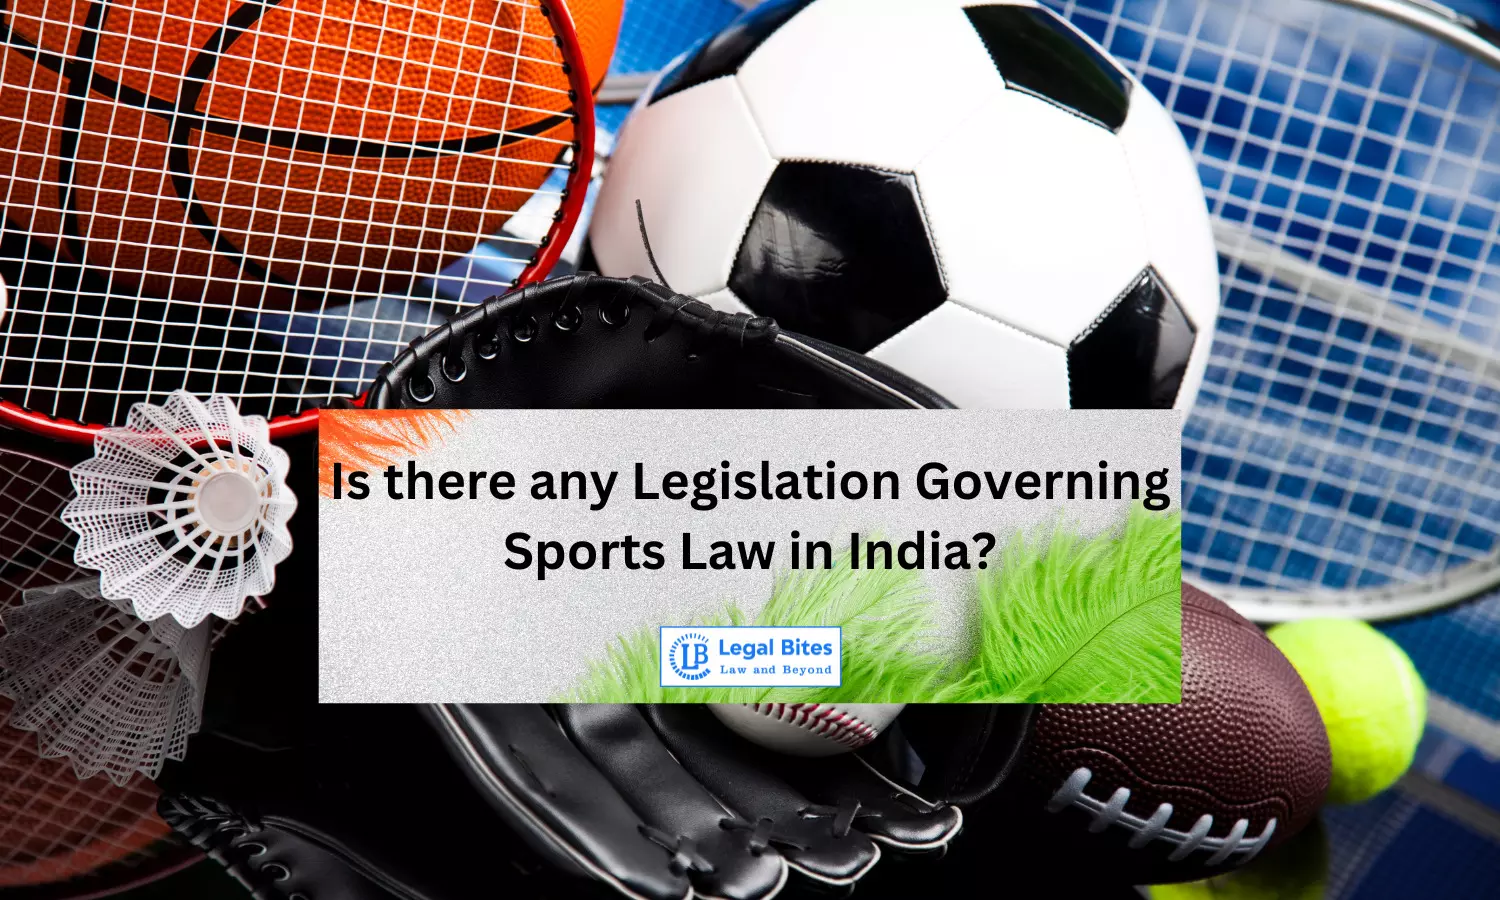 Is there any Legislation Governing Sports Law in India?